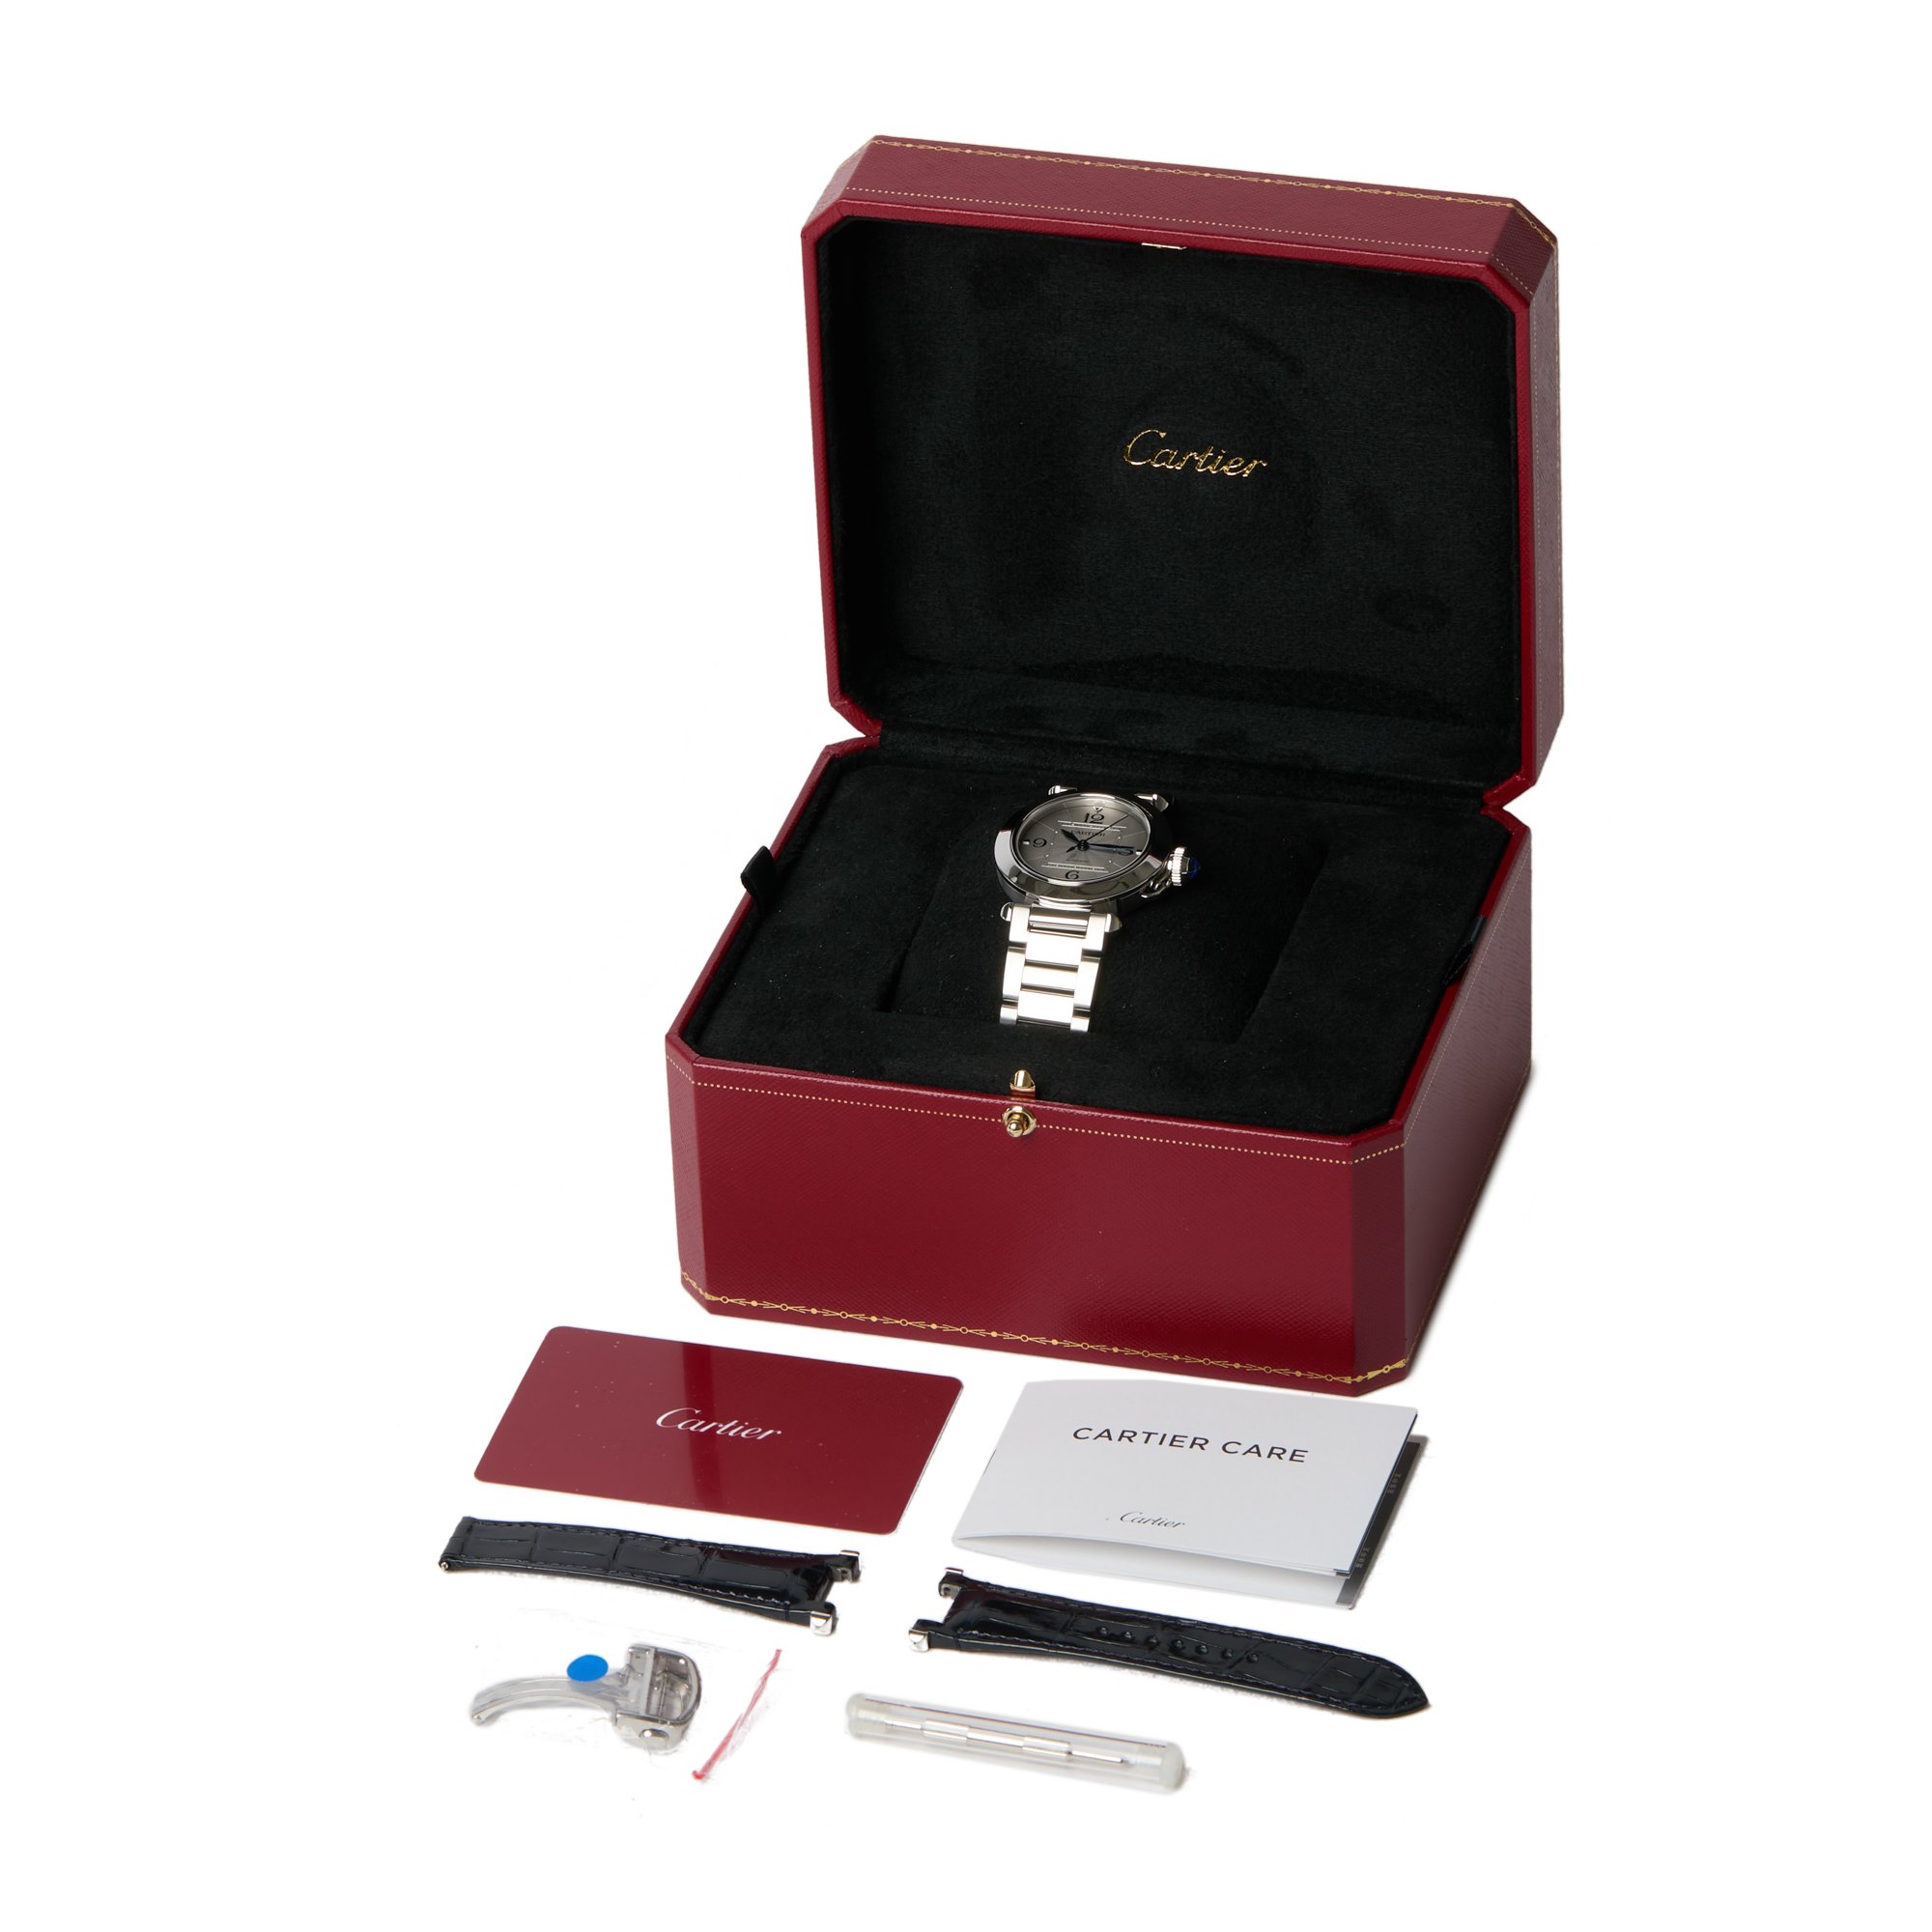 Cartier Pasha Stainless Steel WSPA0013 or 4327